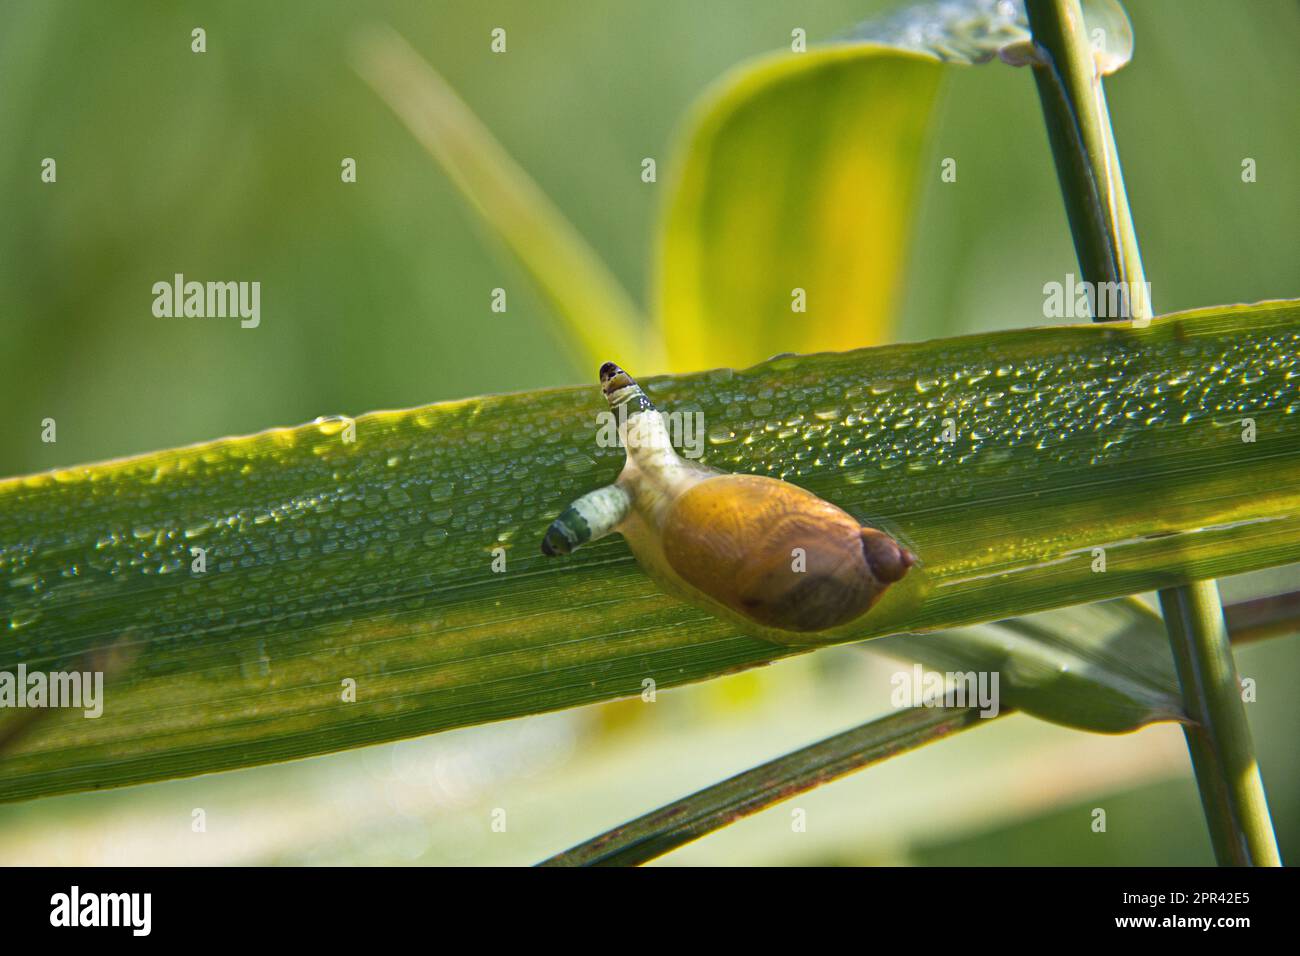 green-banded broodsac (Leucochloridium paradoxum), flatworm in the feelers of a snail (Succinea), Germany Stock Photo